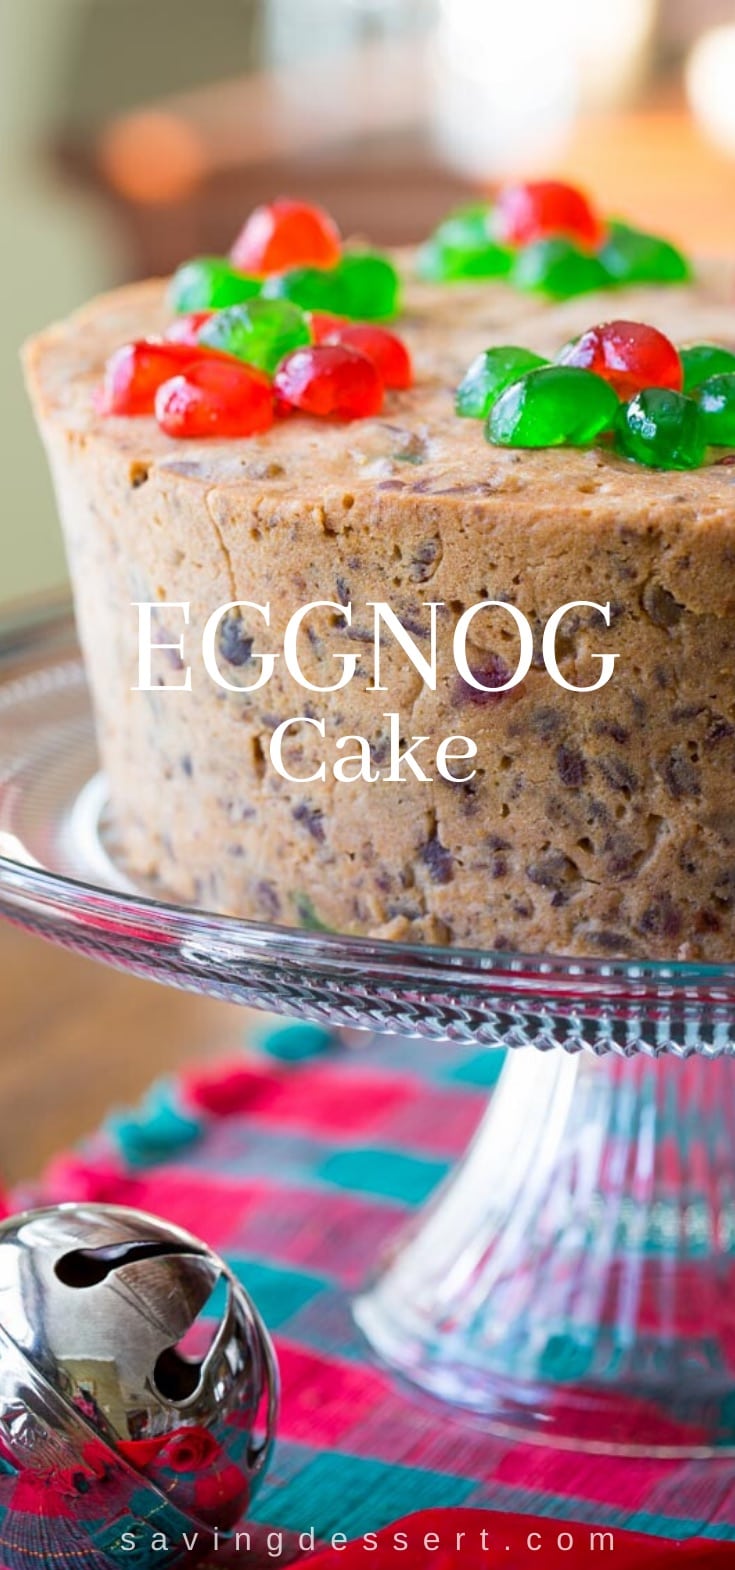 Eggnog Cake with candied cherries on top